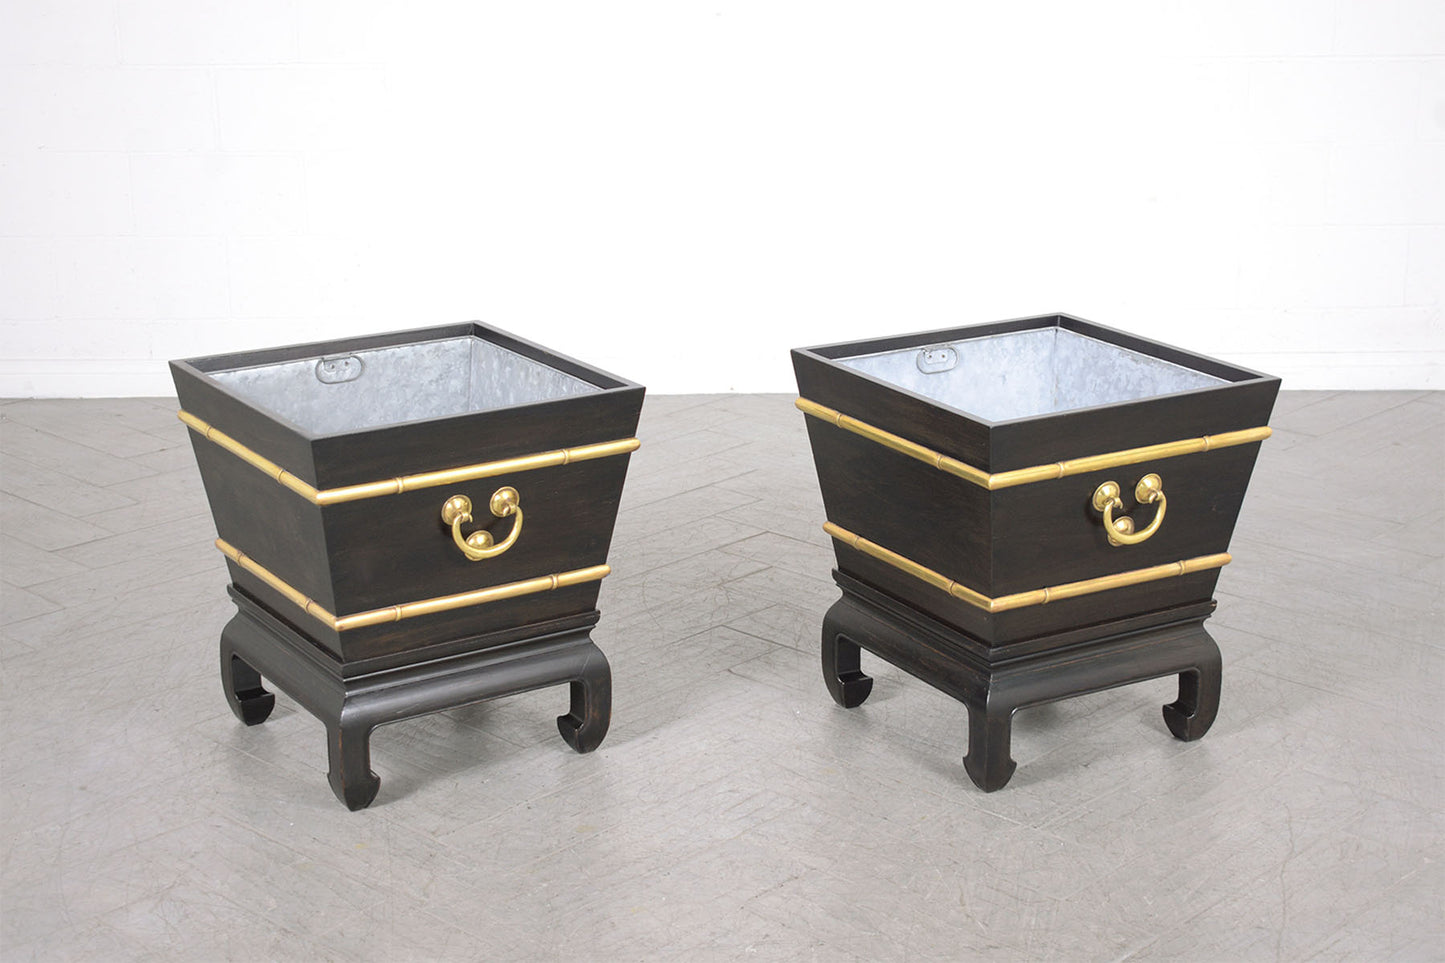 Restored Early 1900s Chinese Wood and Brass Garden Planters